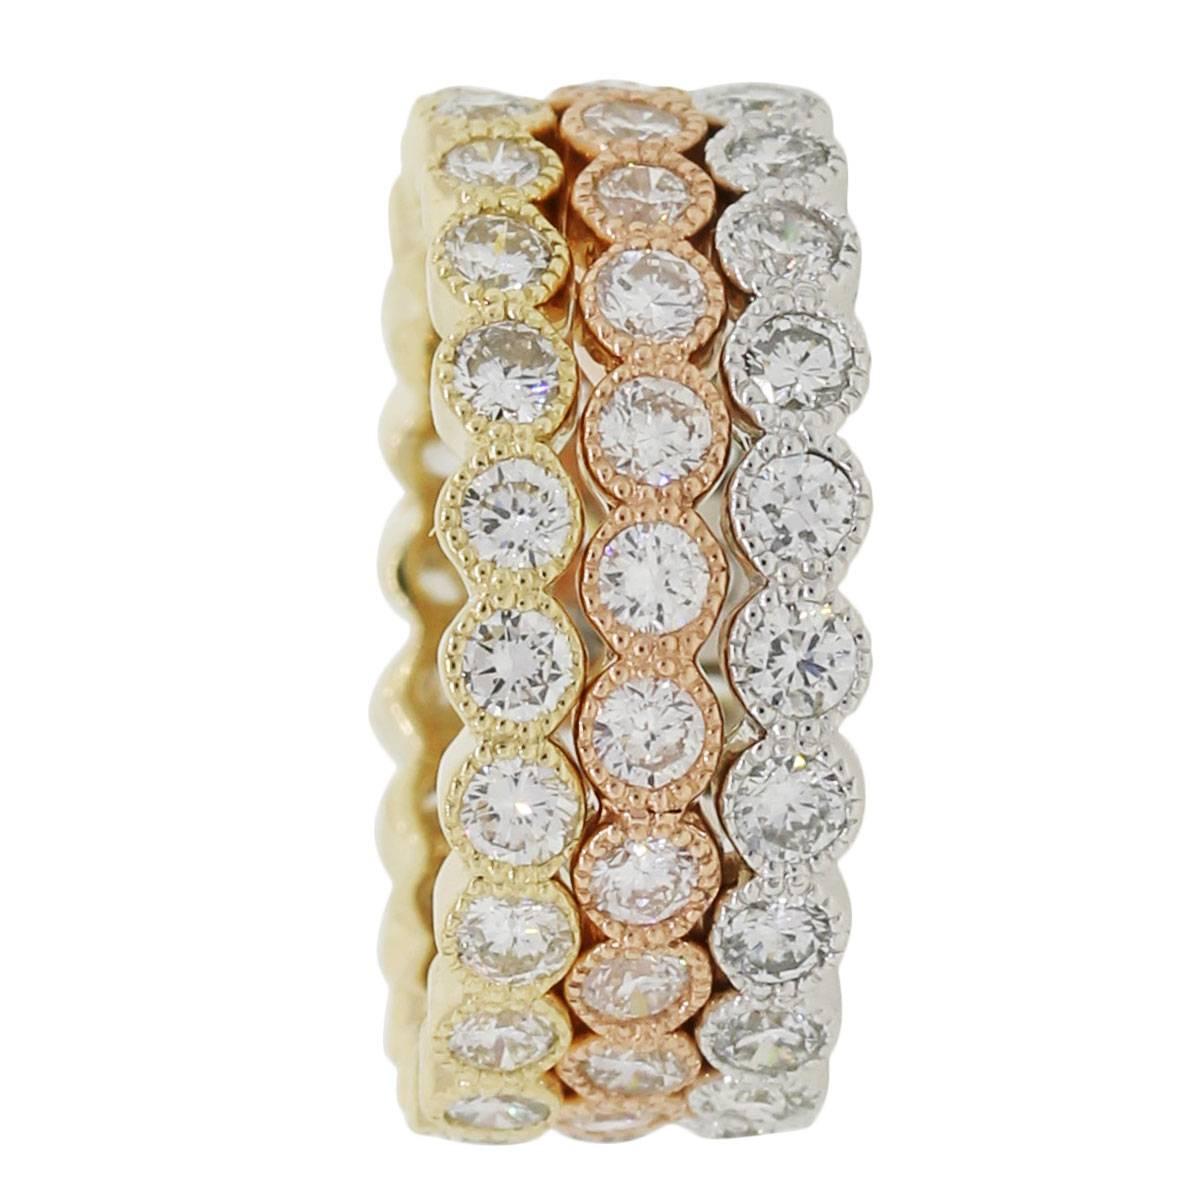 Material: 14k white gold, yellow gold, rose gold
Diamond Details: Approximately 3.05ctw of round brilliant diamonds. Diamonds are G/H in color and SI in clarity
Ring Size: 5.75
Ring Measurements: Each band measures 0.82″ x 0.11″ x 0.82″
Total